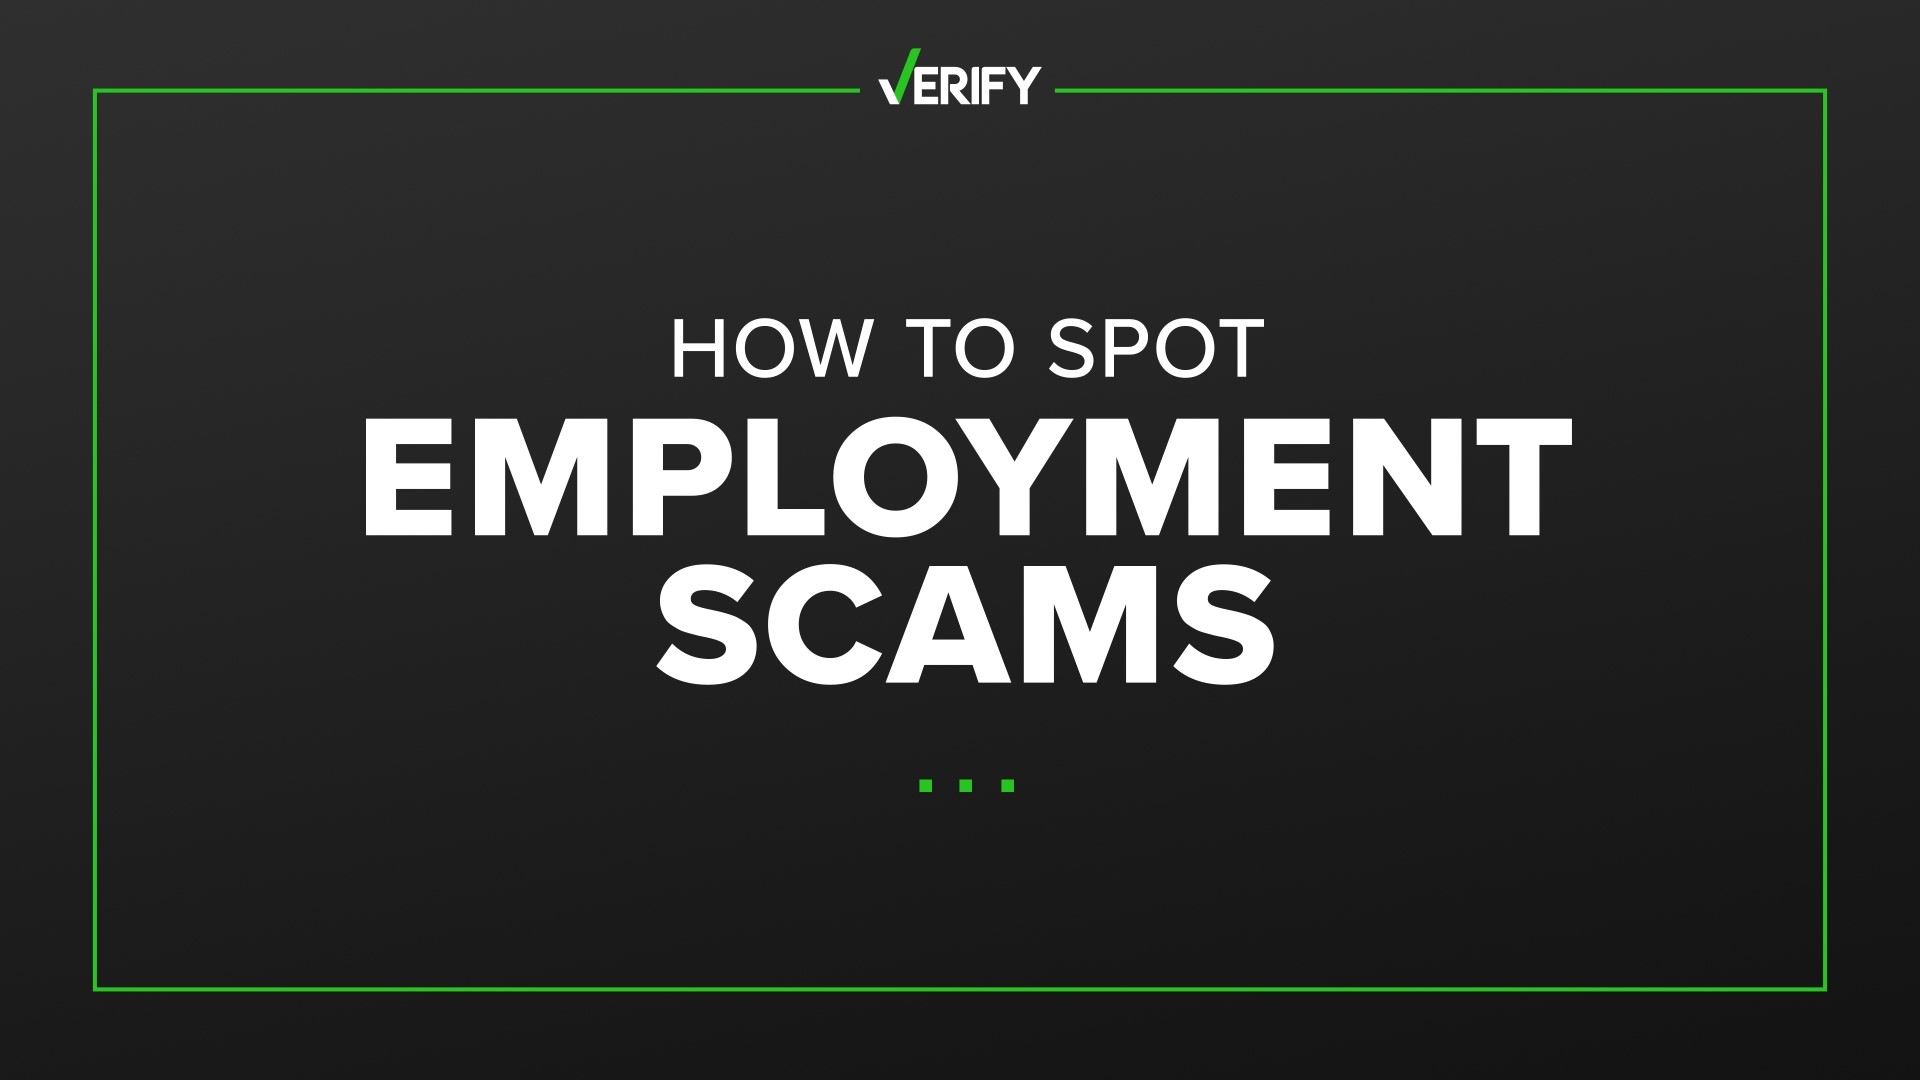 Millions of Americans fall victim to job scams each year. Here are some ways to identify and avoid online employment scams during the hiring process.